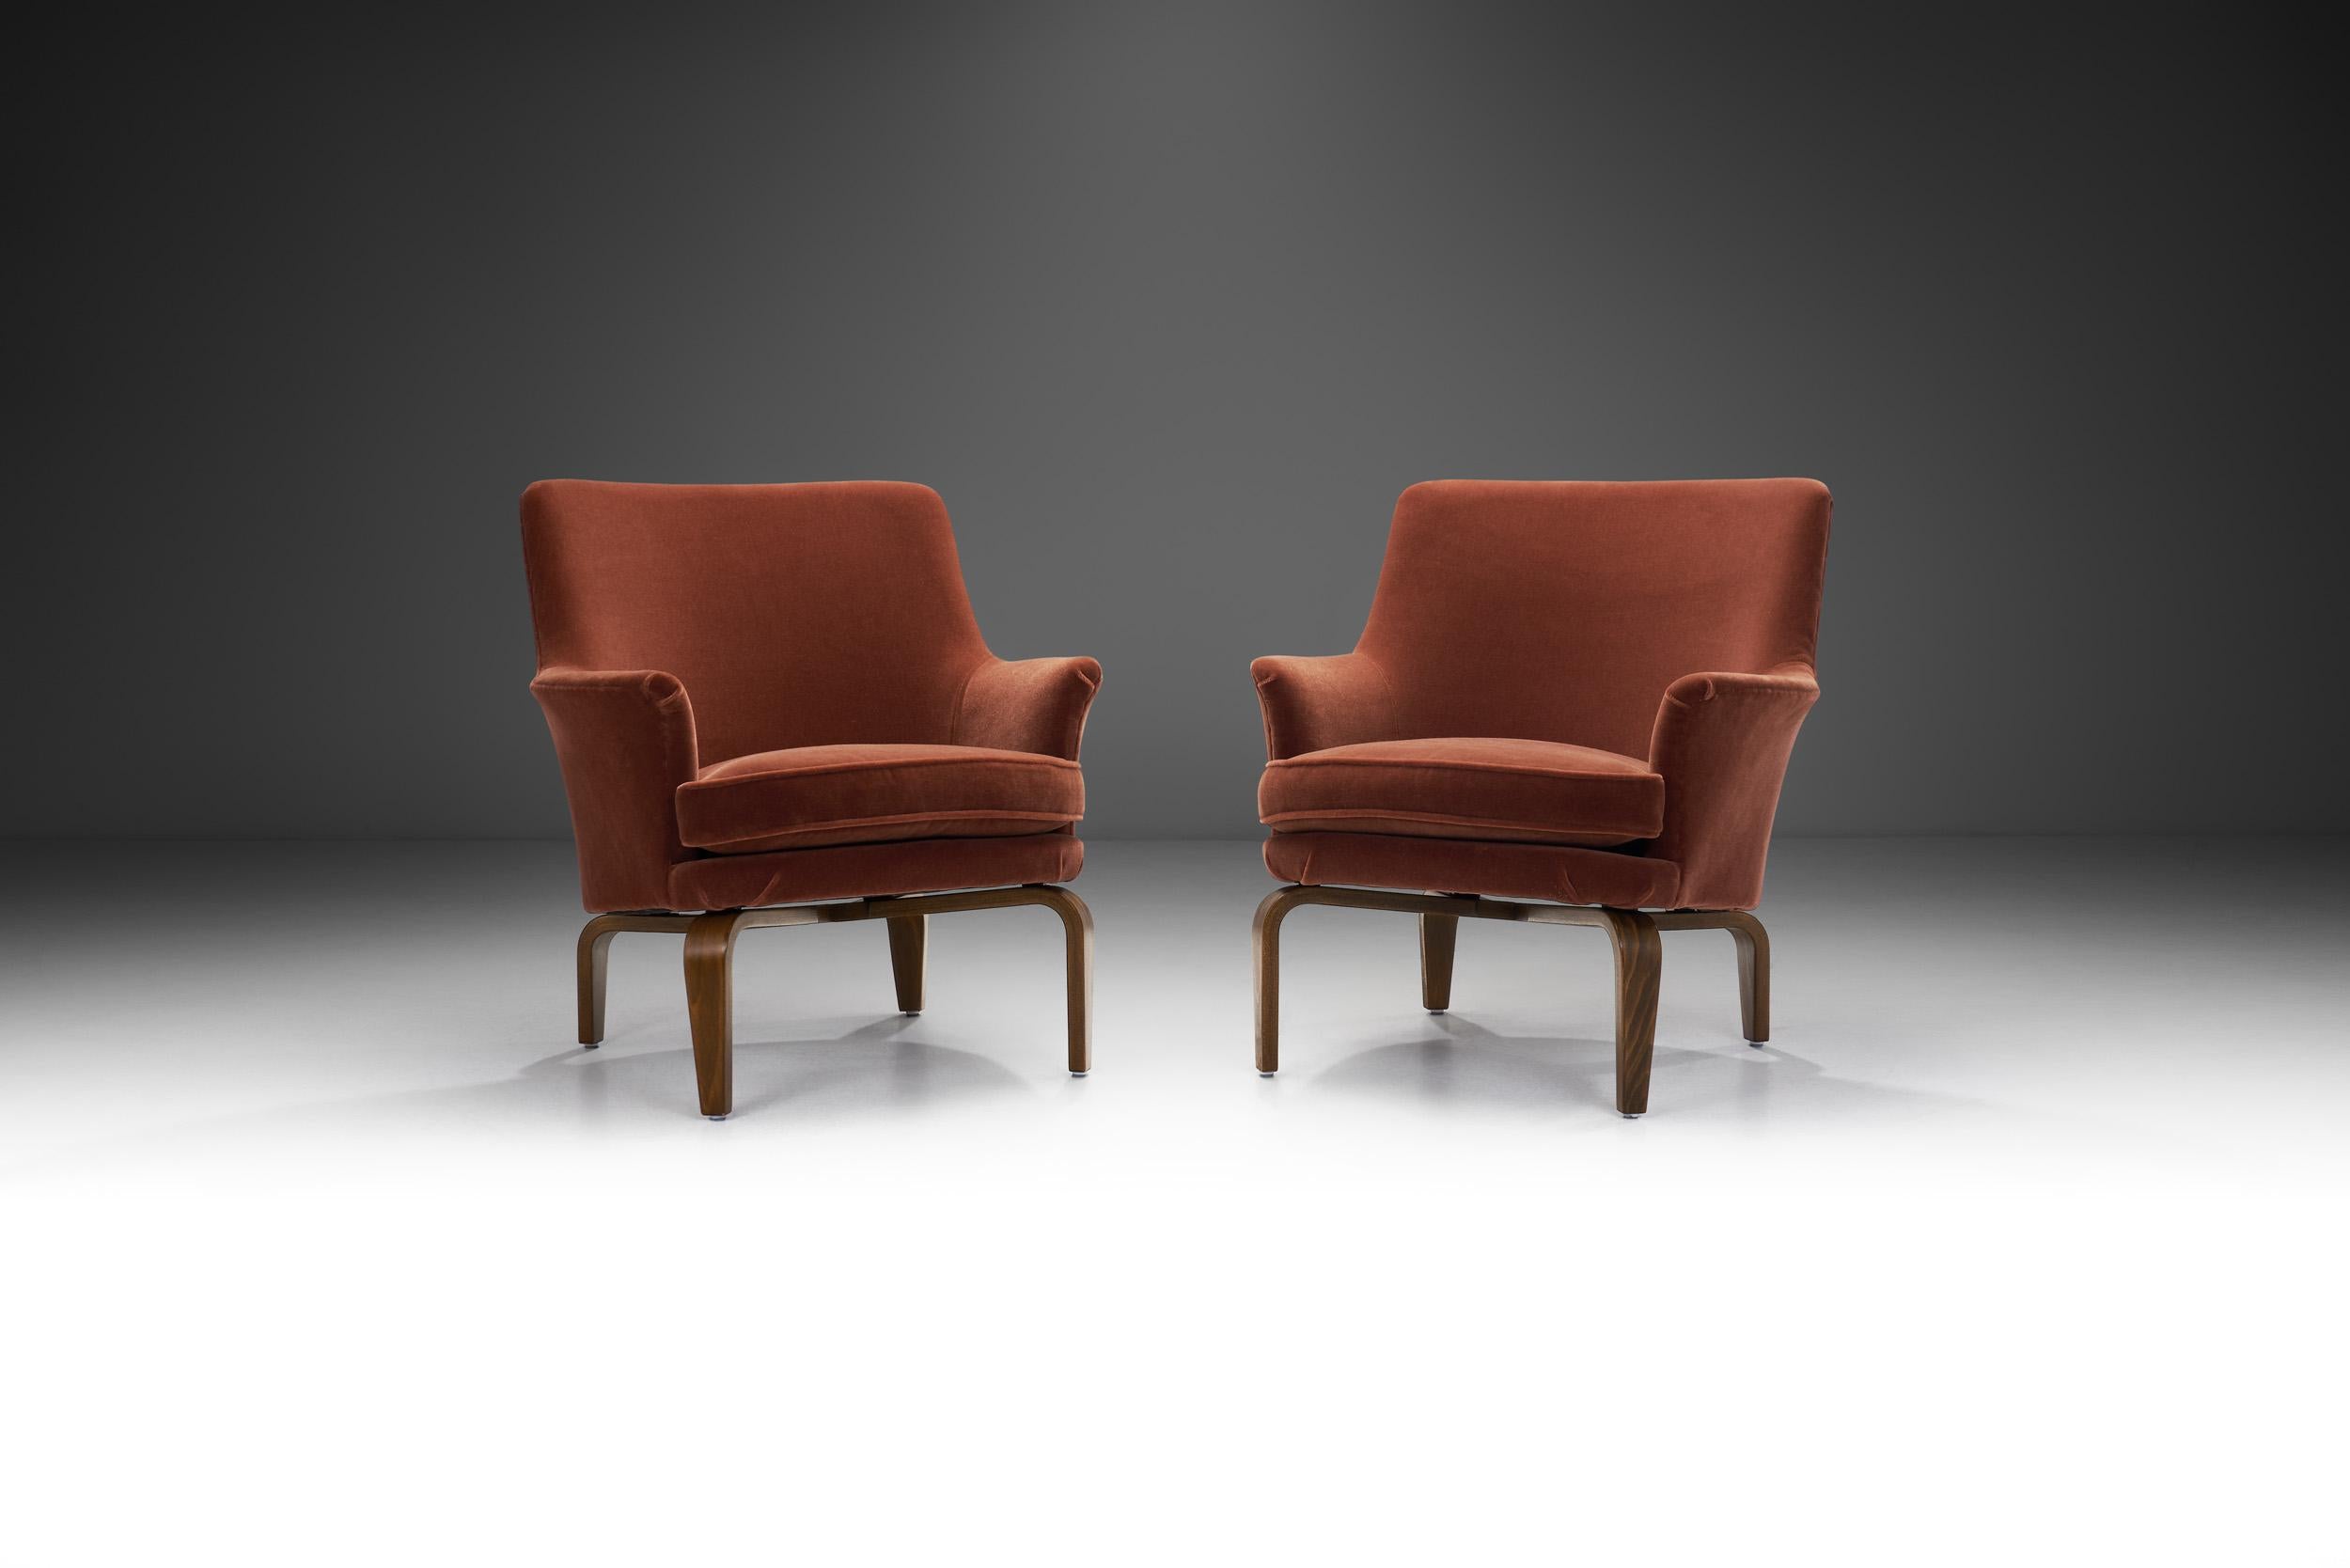 Swedish designer, Arne Norell’s conceptual designs, gained recognition for their use of traditional materials and forms like fabrics and wood combined with simple and vanguard lines. This pair of “Pilot” chairs was designed by Arne Norell in 1967